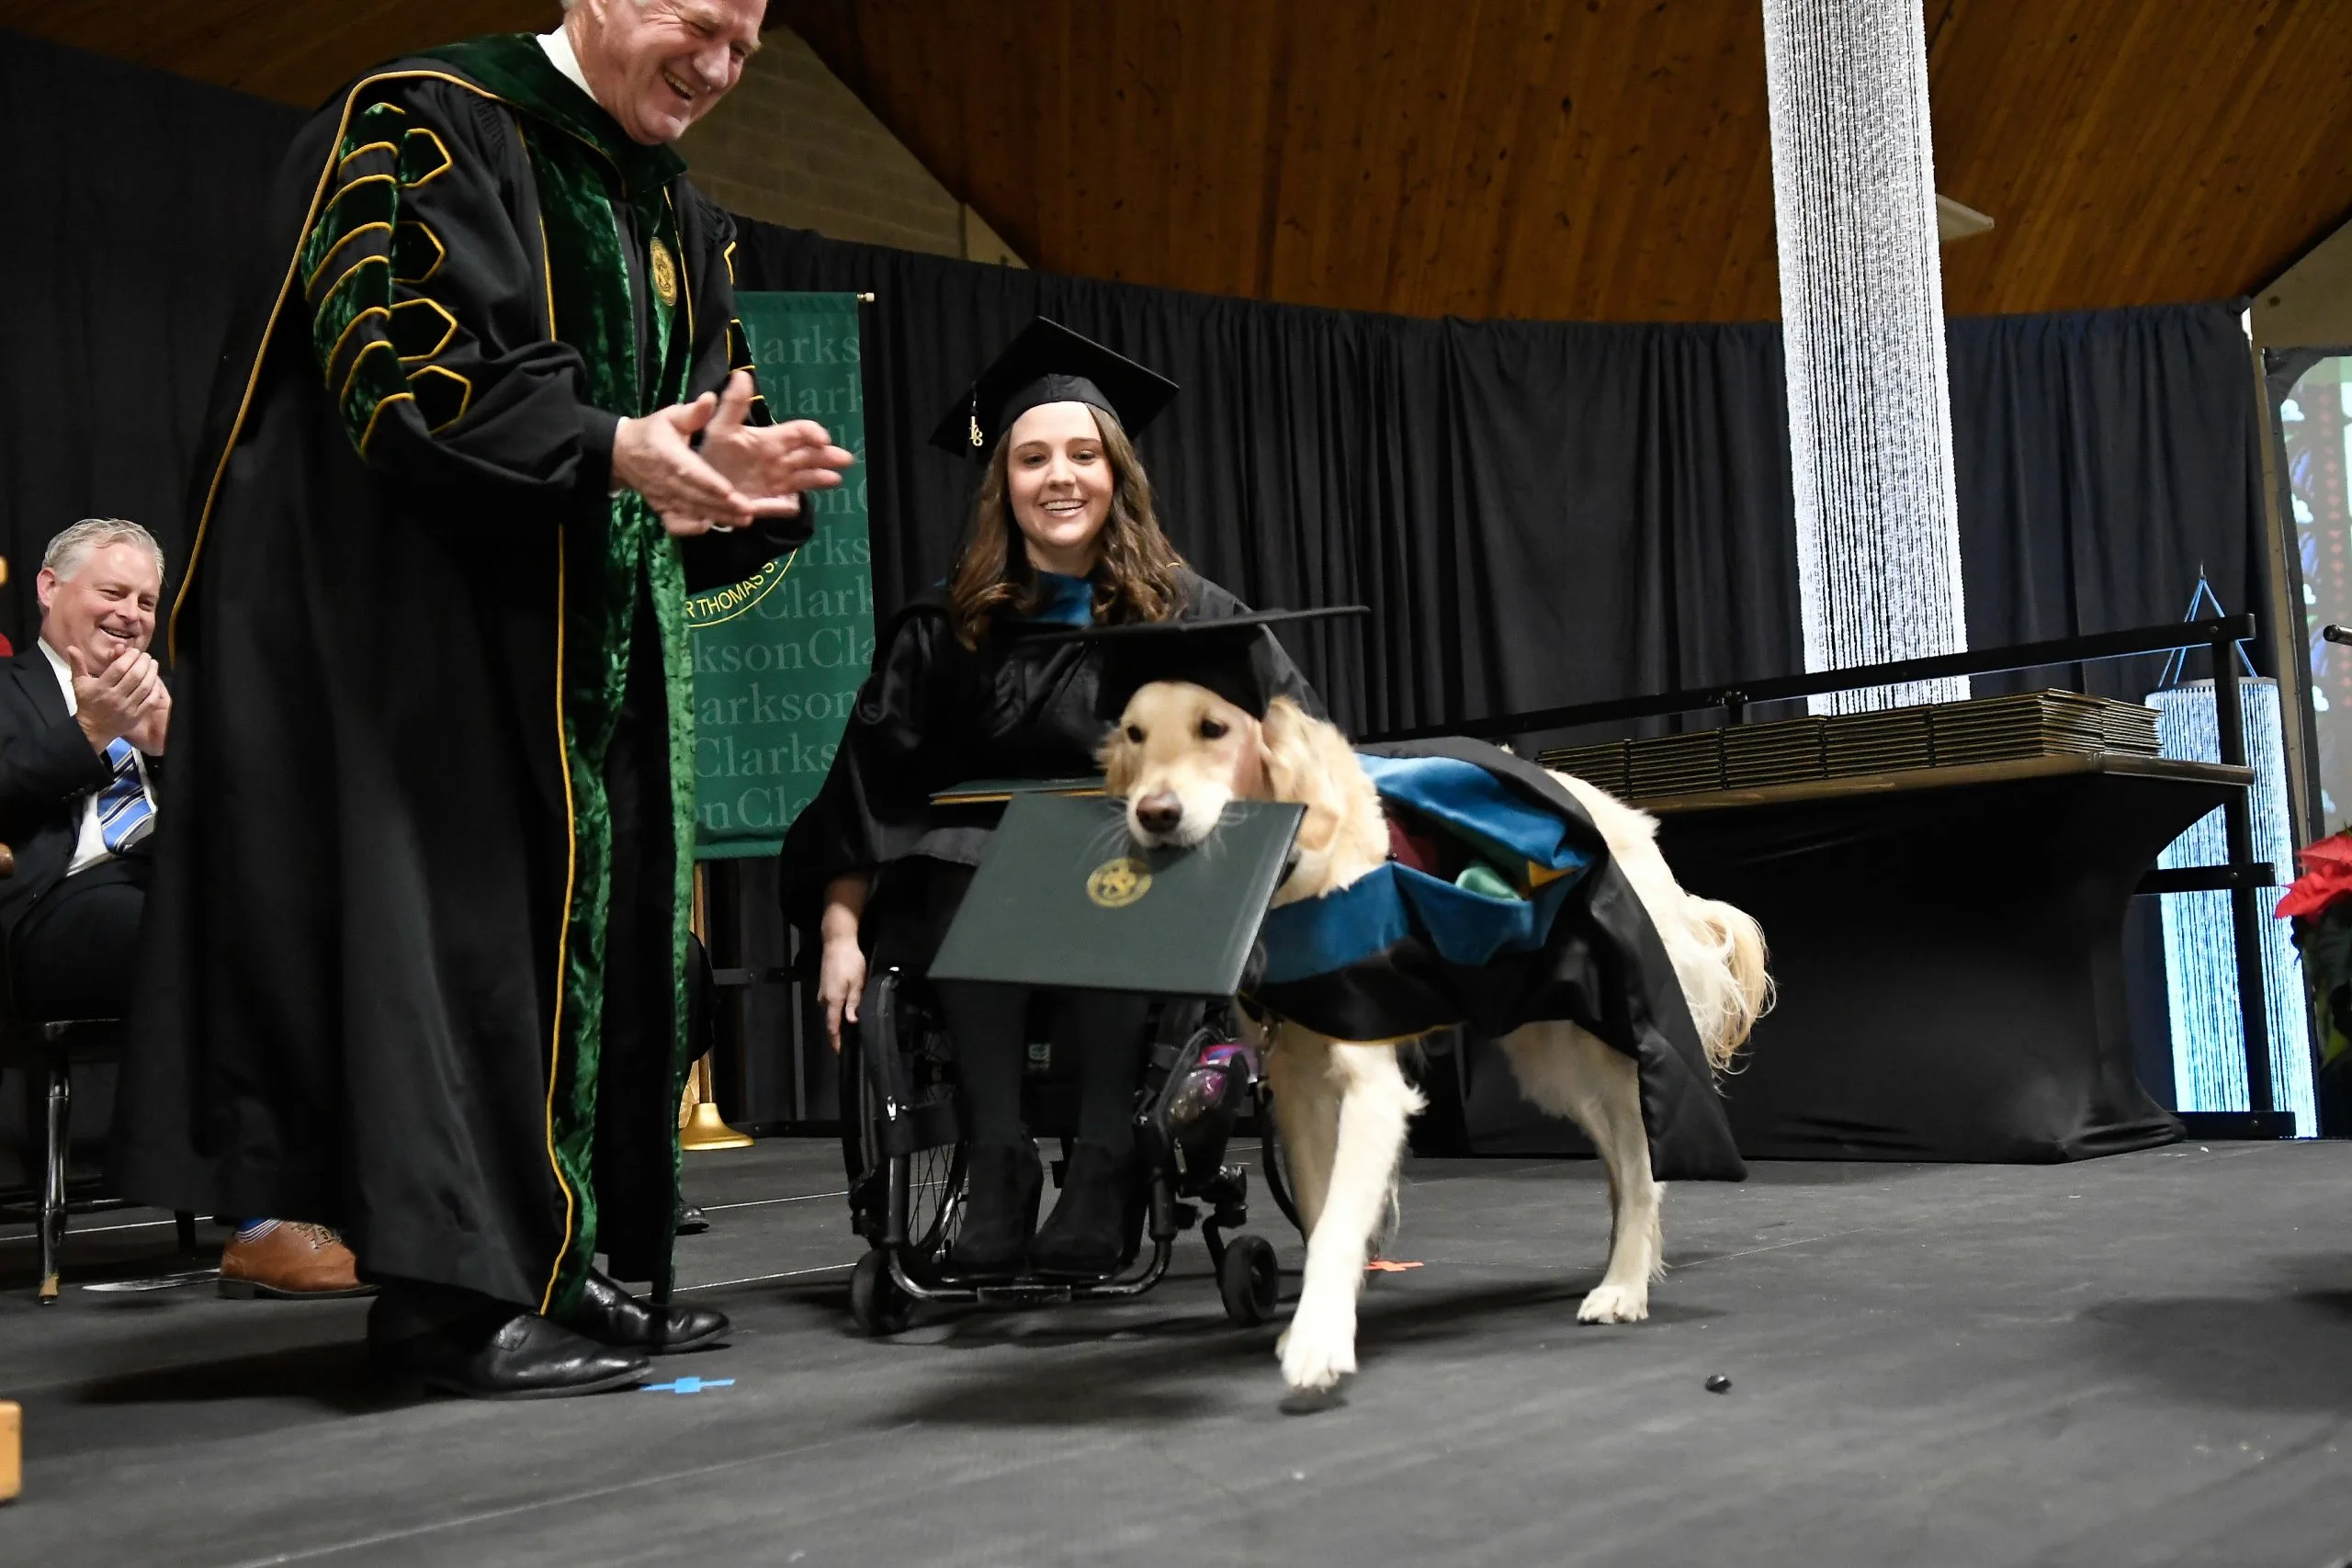 the dog carries the diploma in its mouth